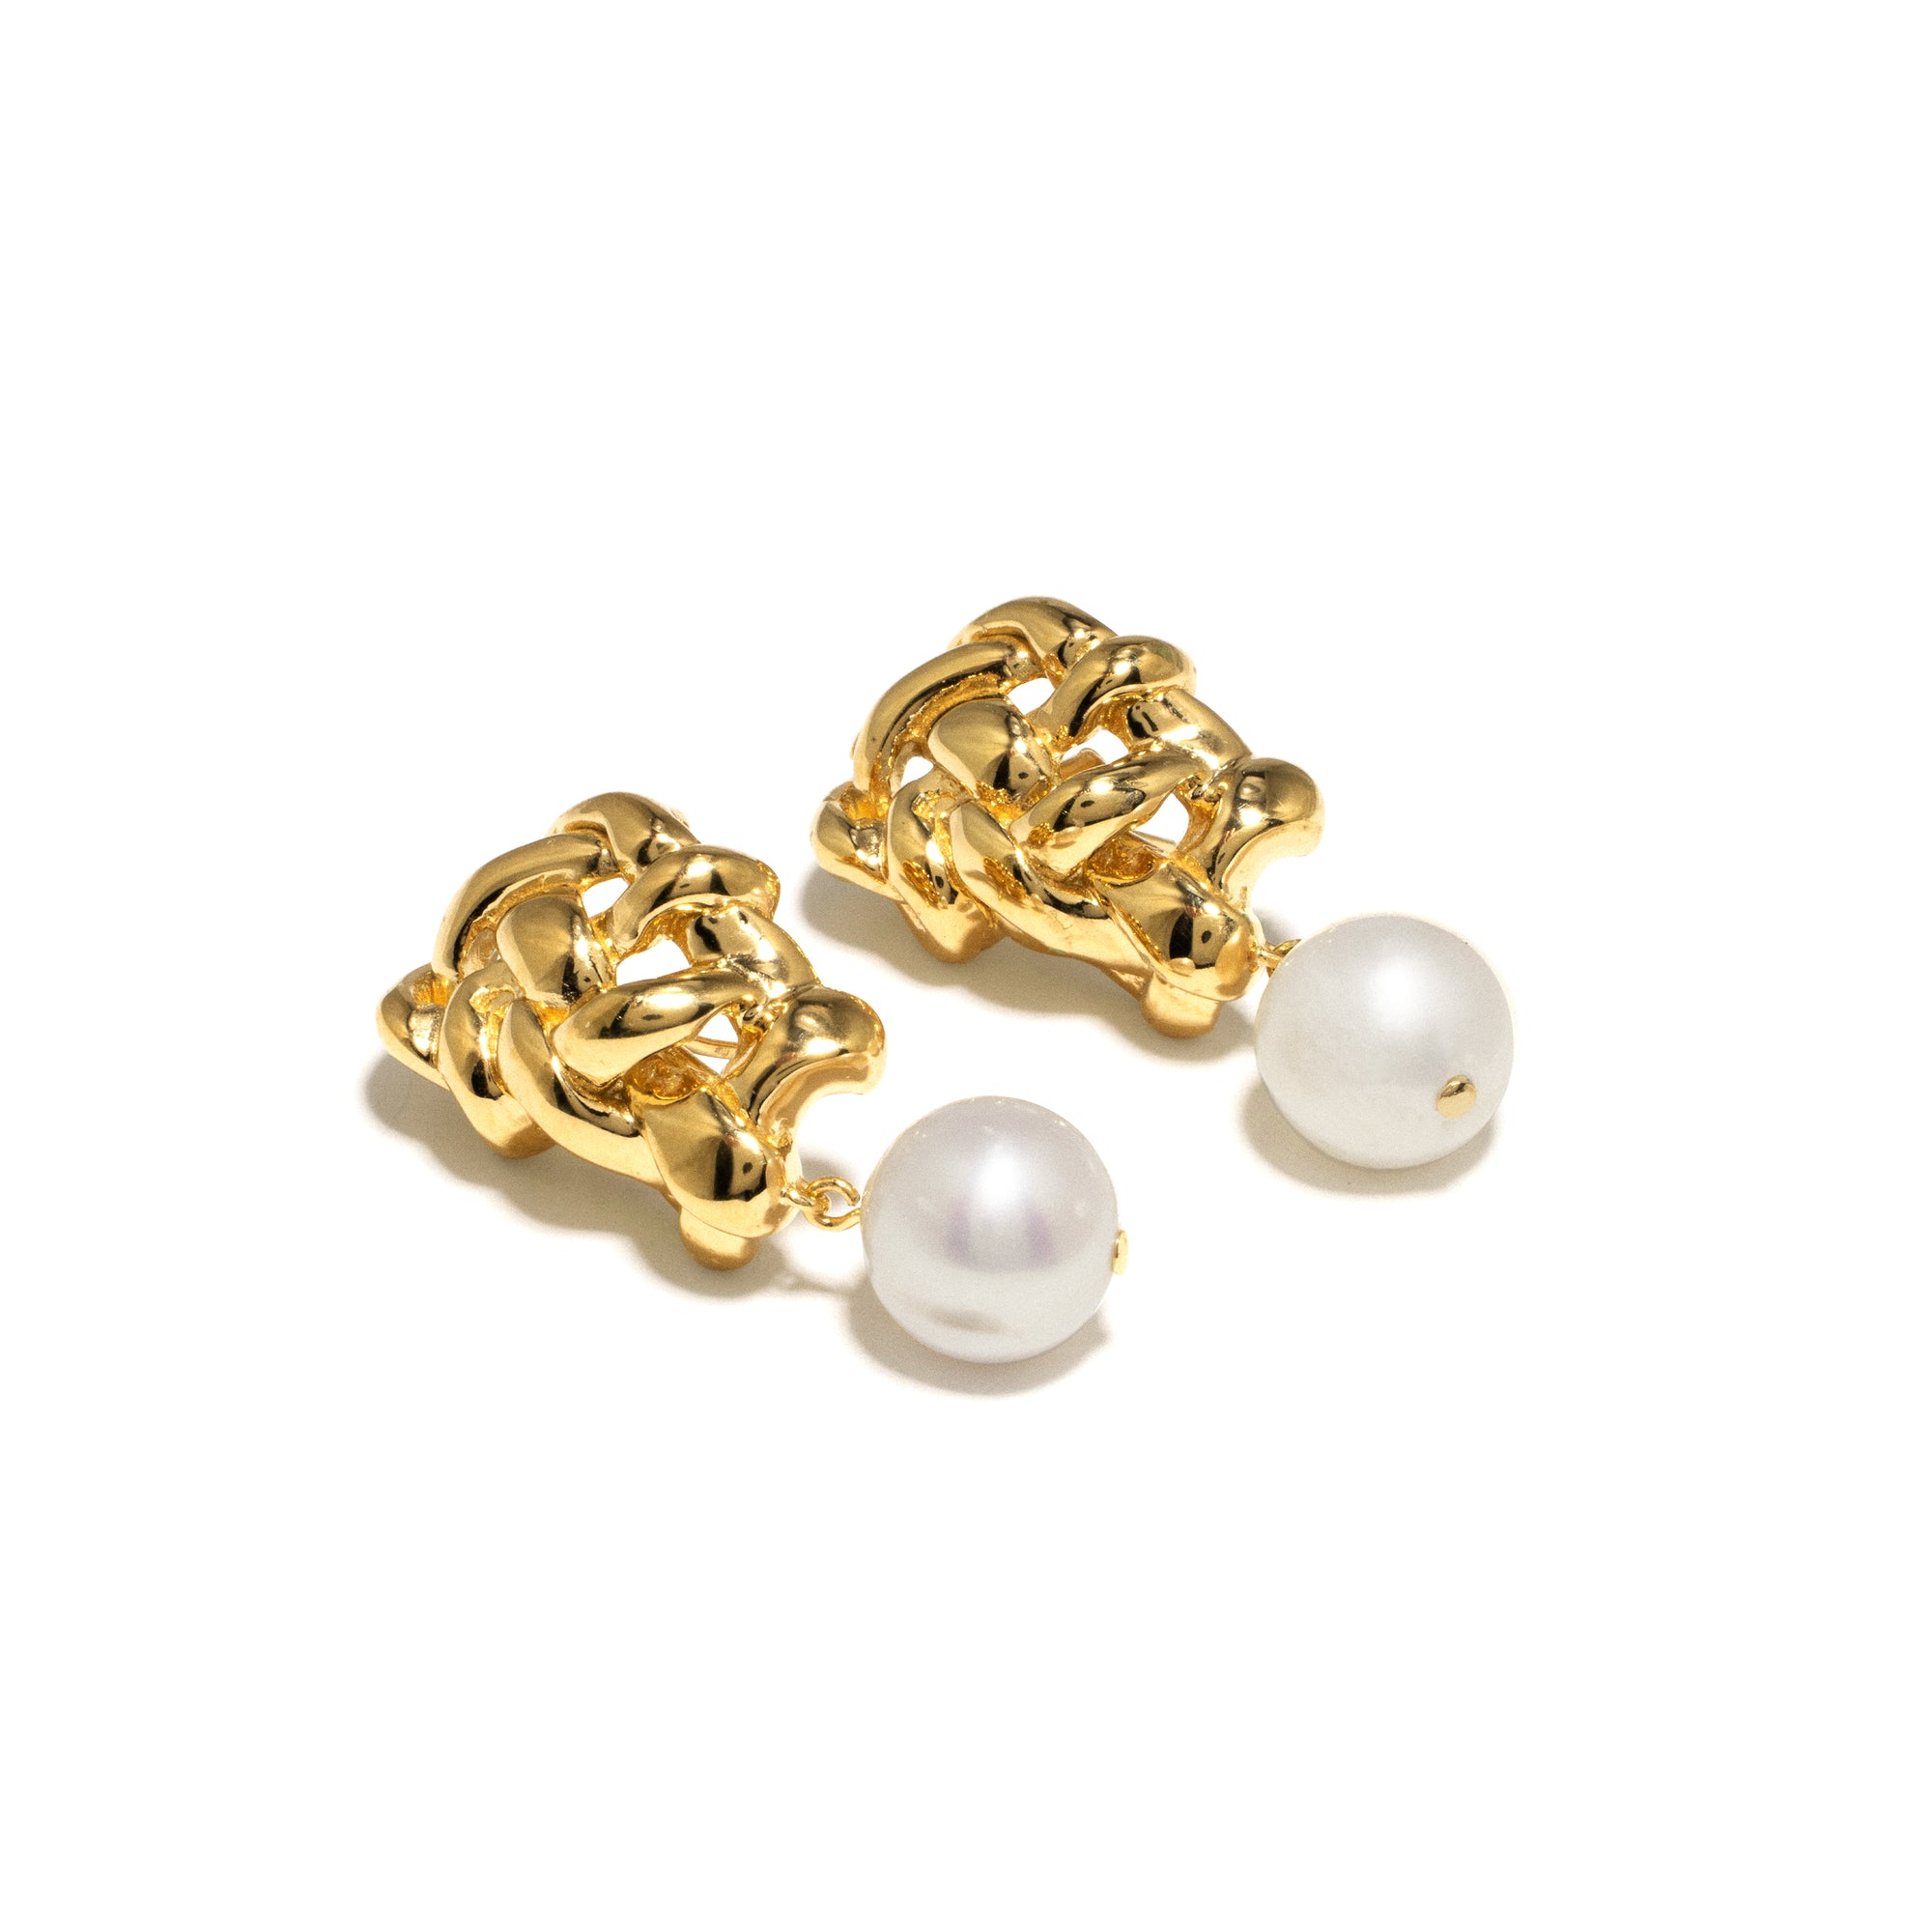 Completedworks - Women's A Shimmer of Possibility Earrings - (Pearl/Gold Vermeil) view 3